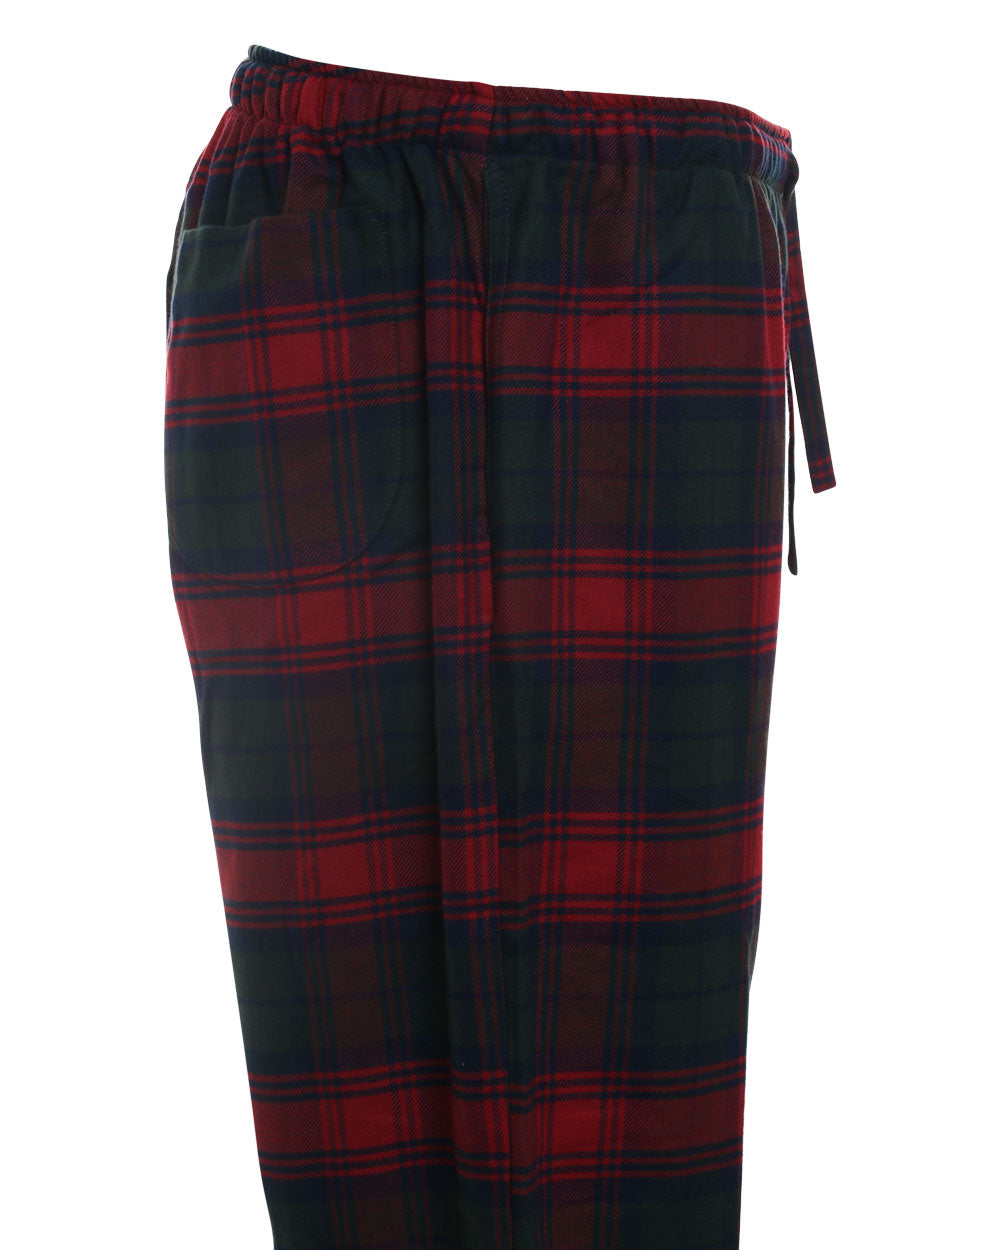 Green and Red Woven Cotton Pajama Pant